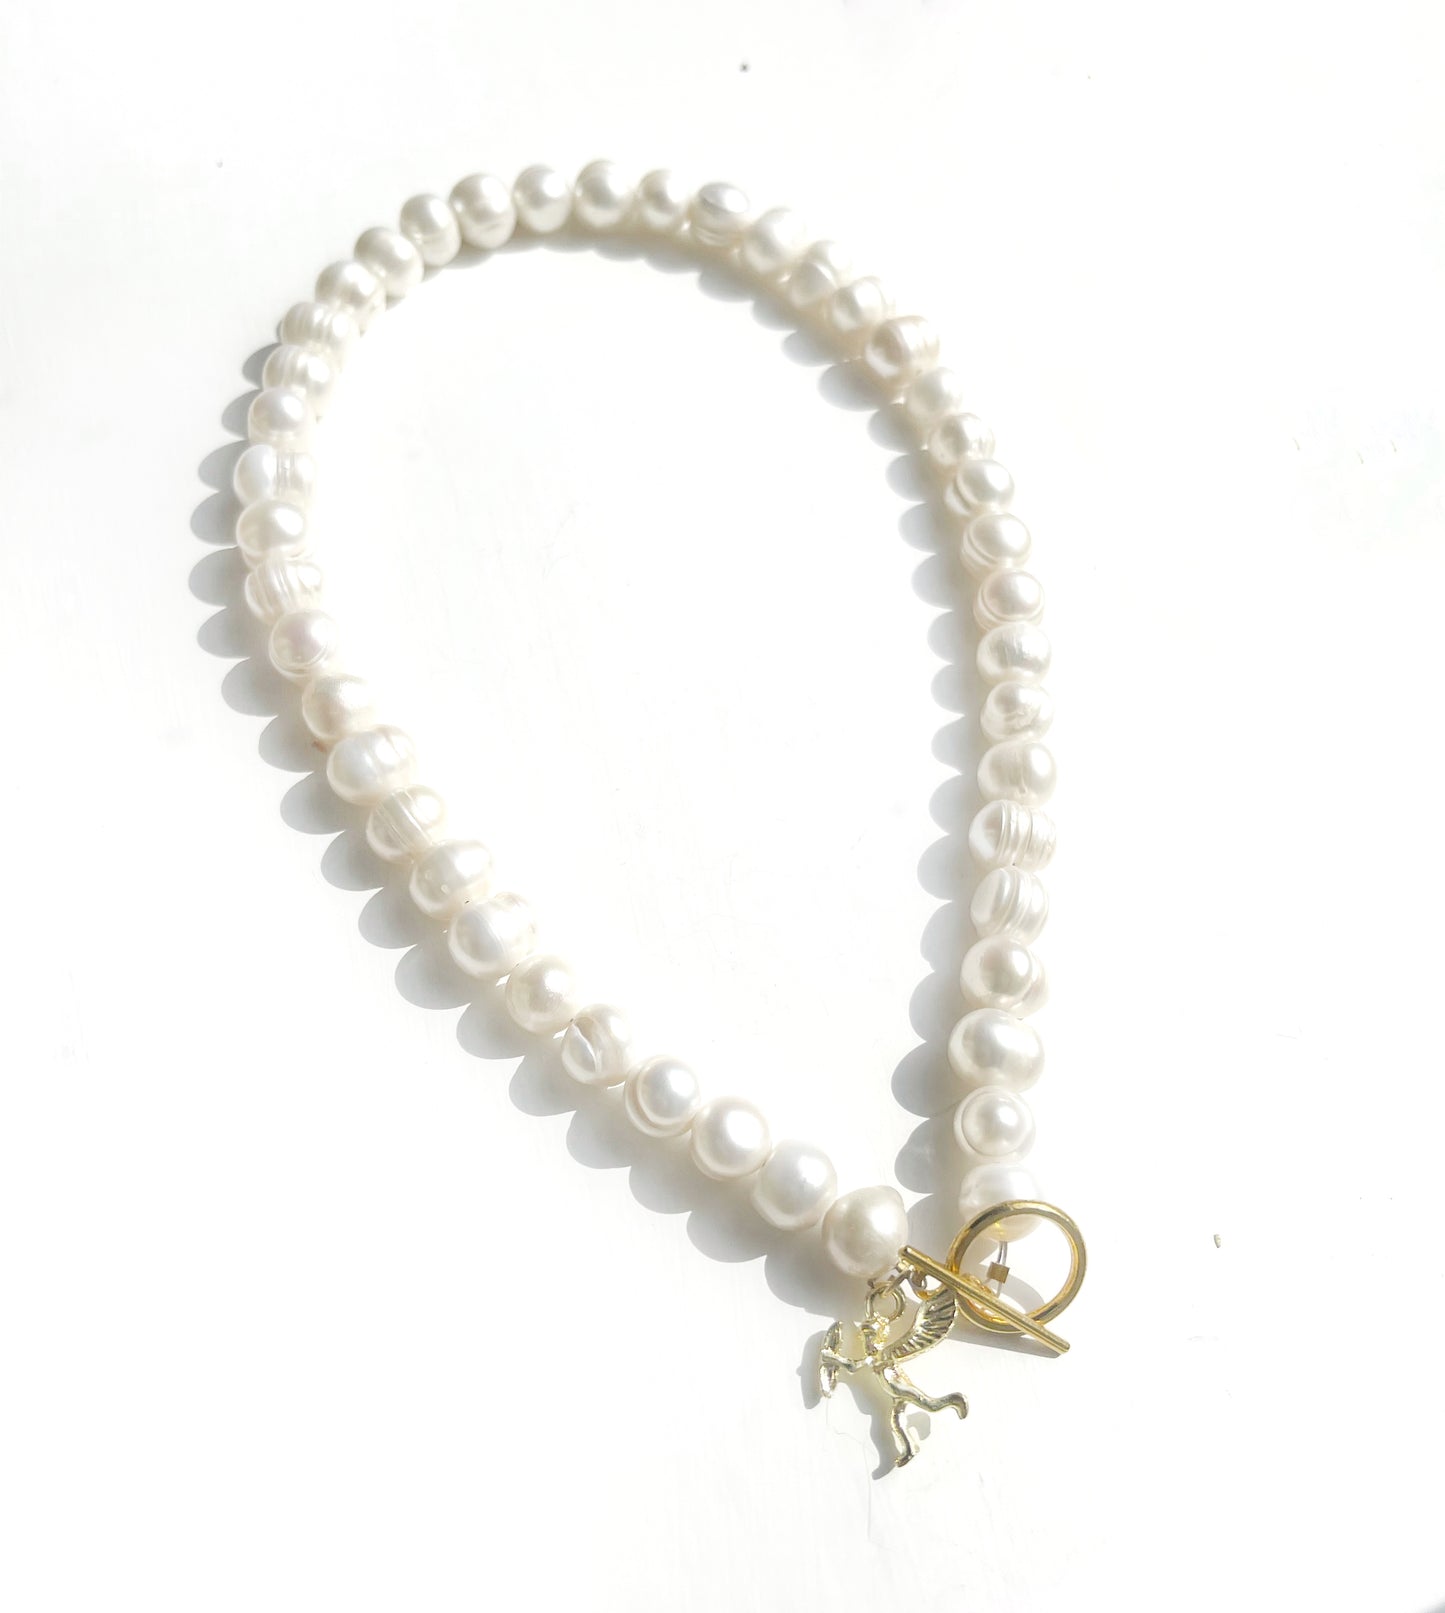 White pearl charm necklace with dainty gold Cupid / cherub charm, classic white pearl jewelry, unique pearl jewelry, summer jewelry